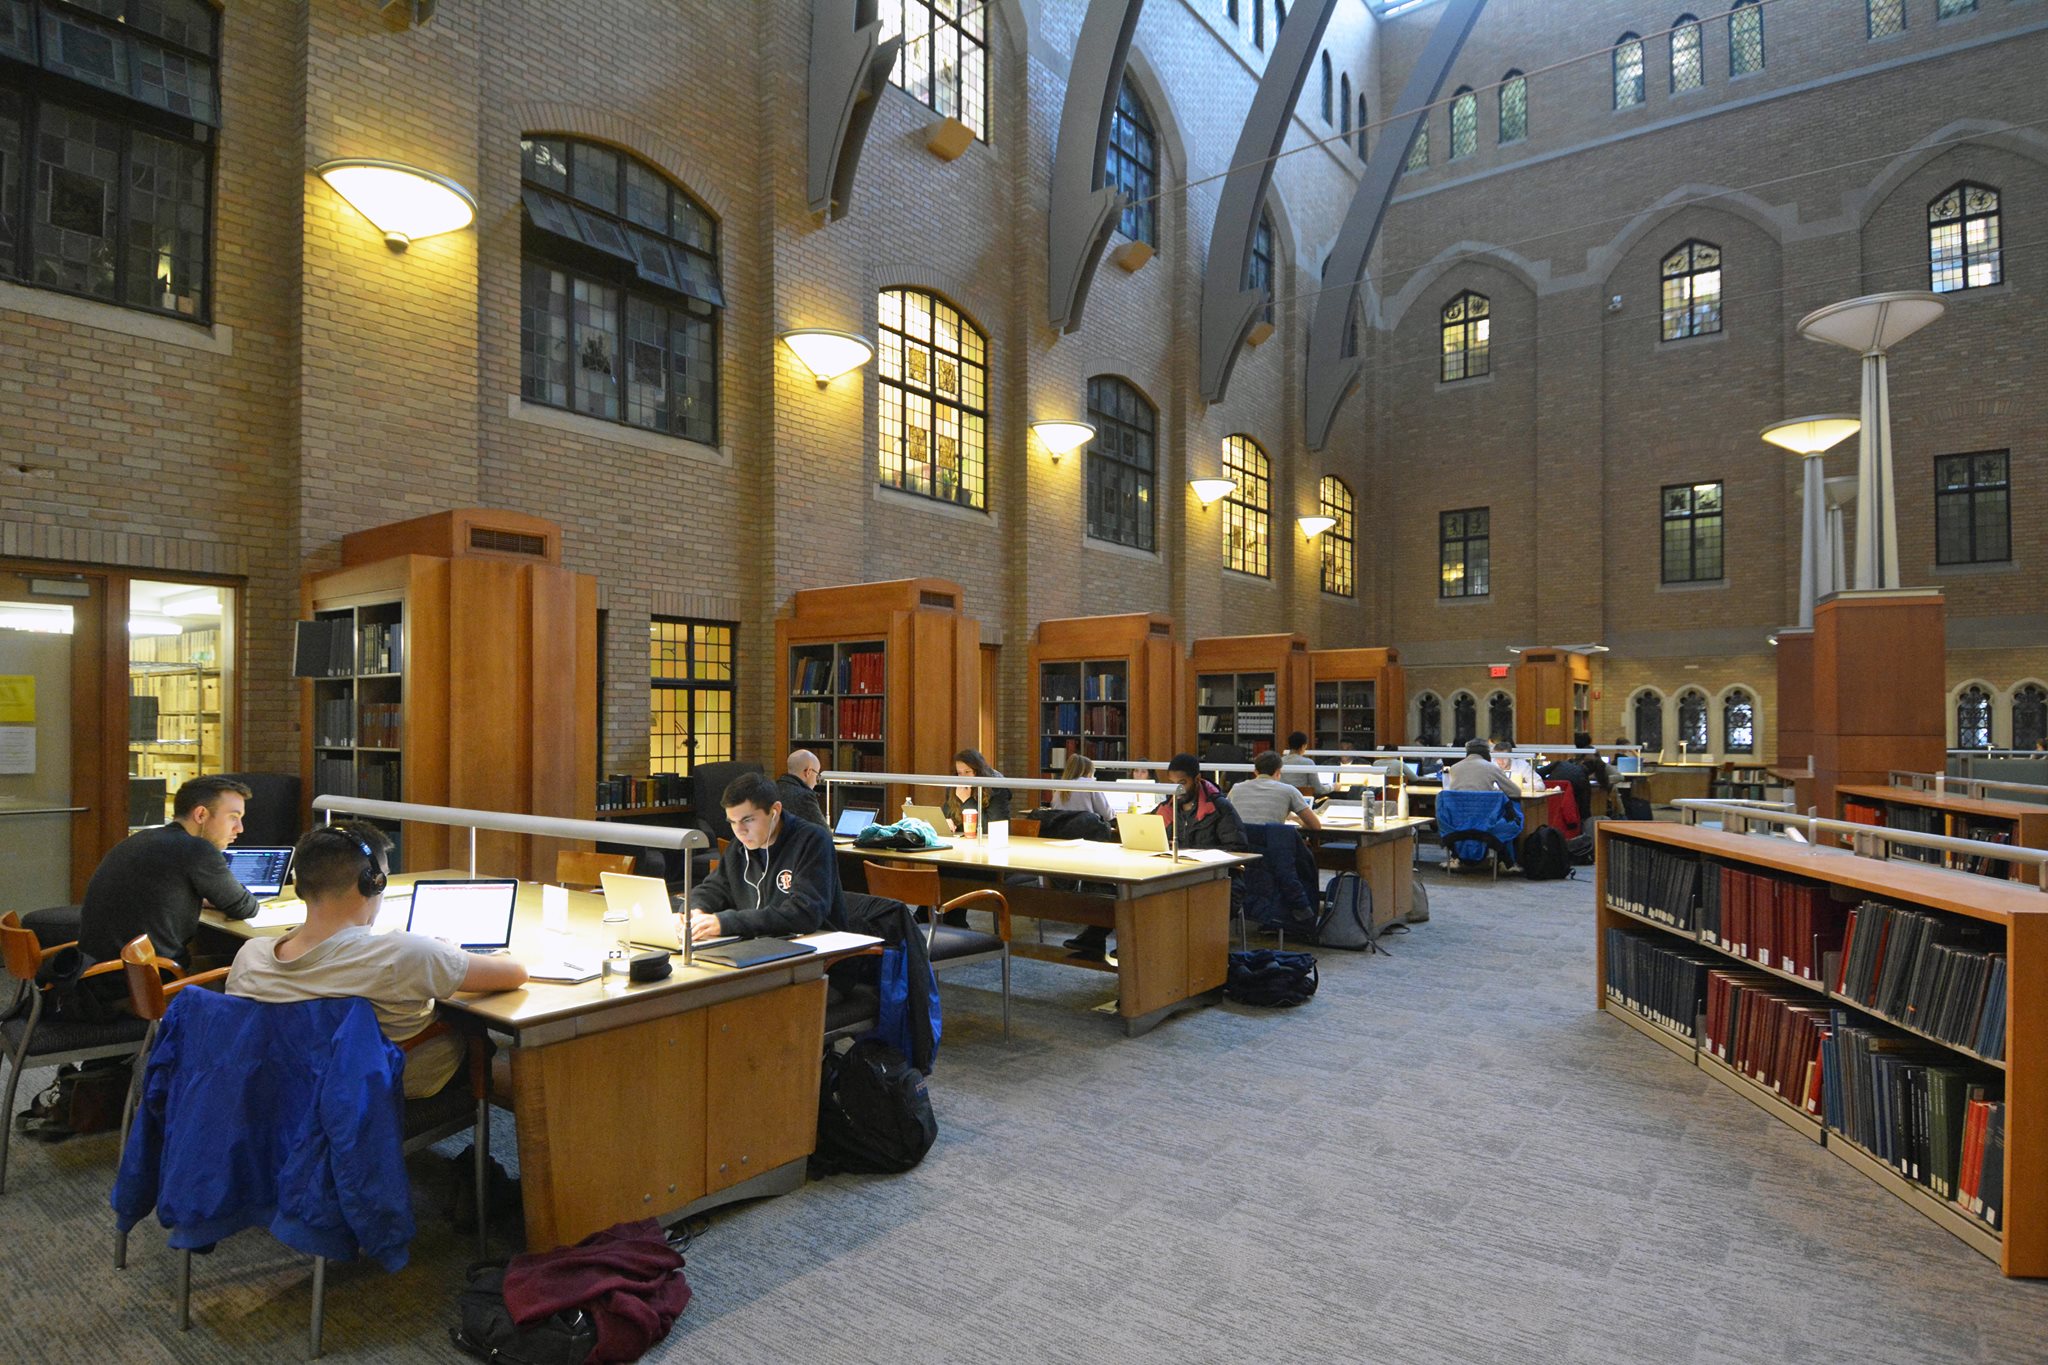 Students studying in the Gilmore Music Library